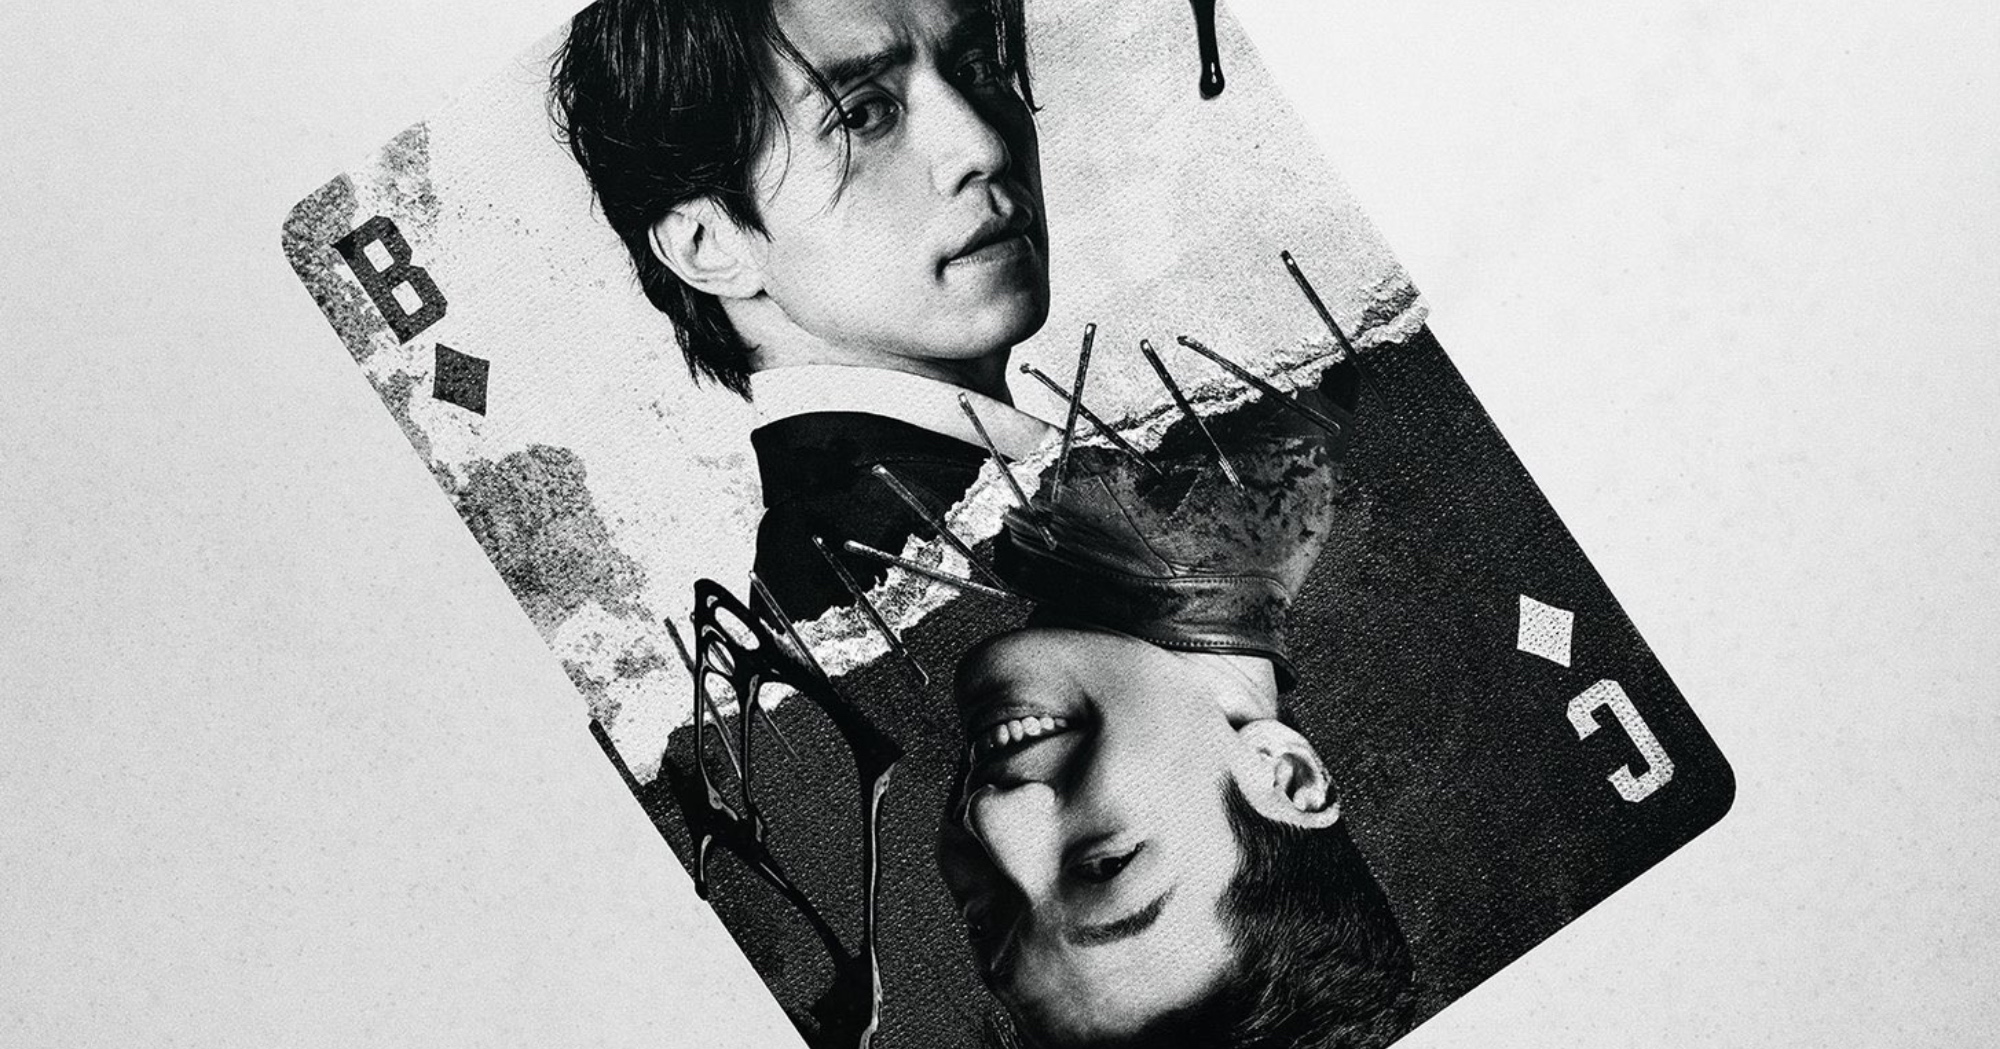 Wi Ha-joon and Lee Dong-wook for 'Bad and Crazy' K-drama poster in black and white on playing card.